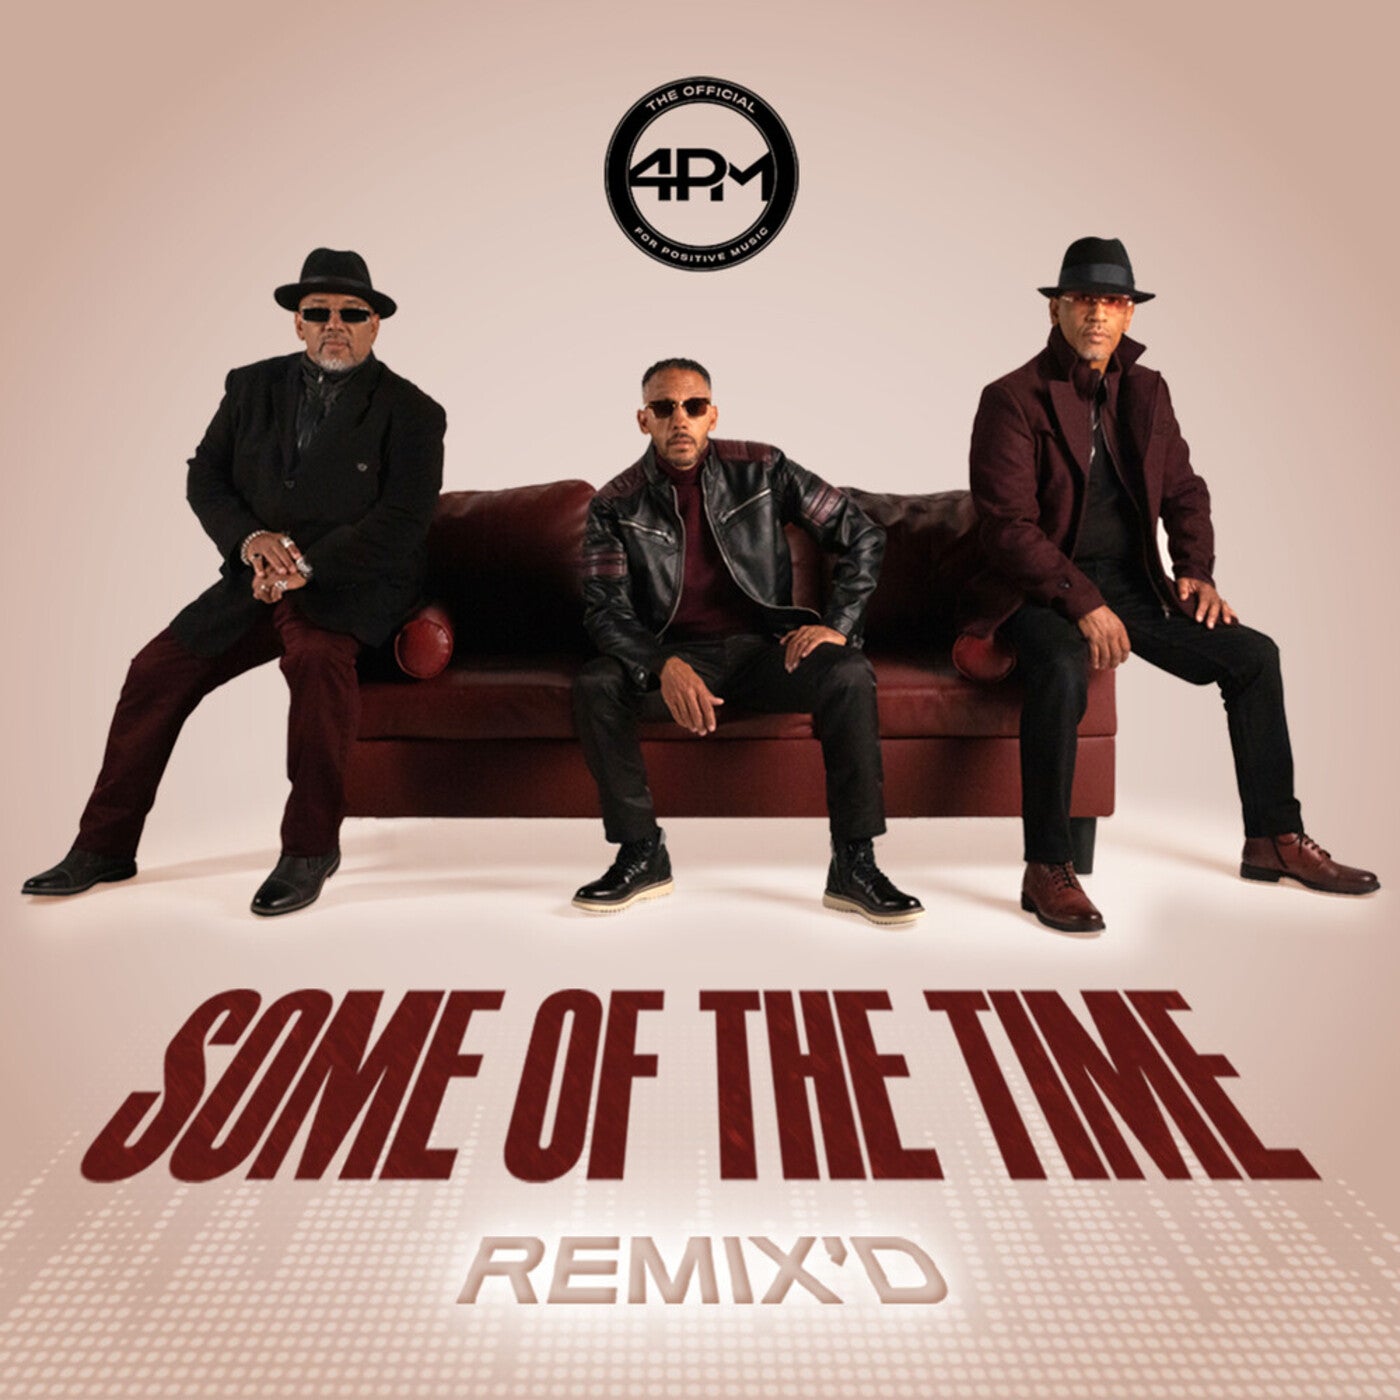 Some Of The Time (ReMix'd)